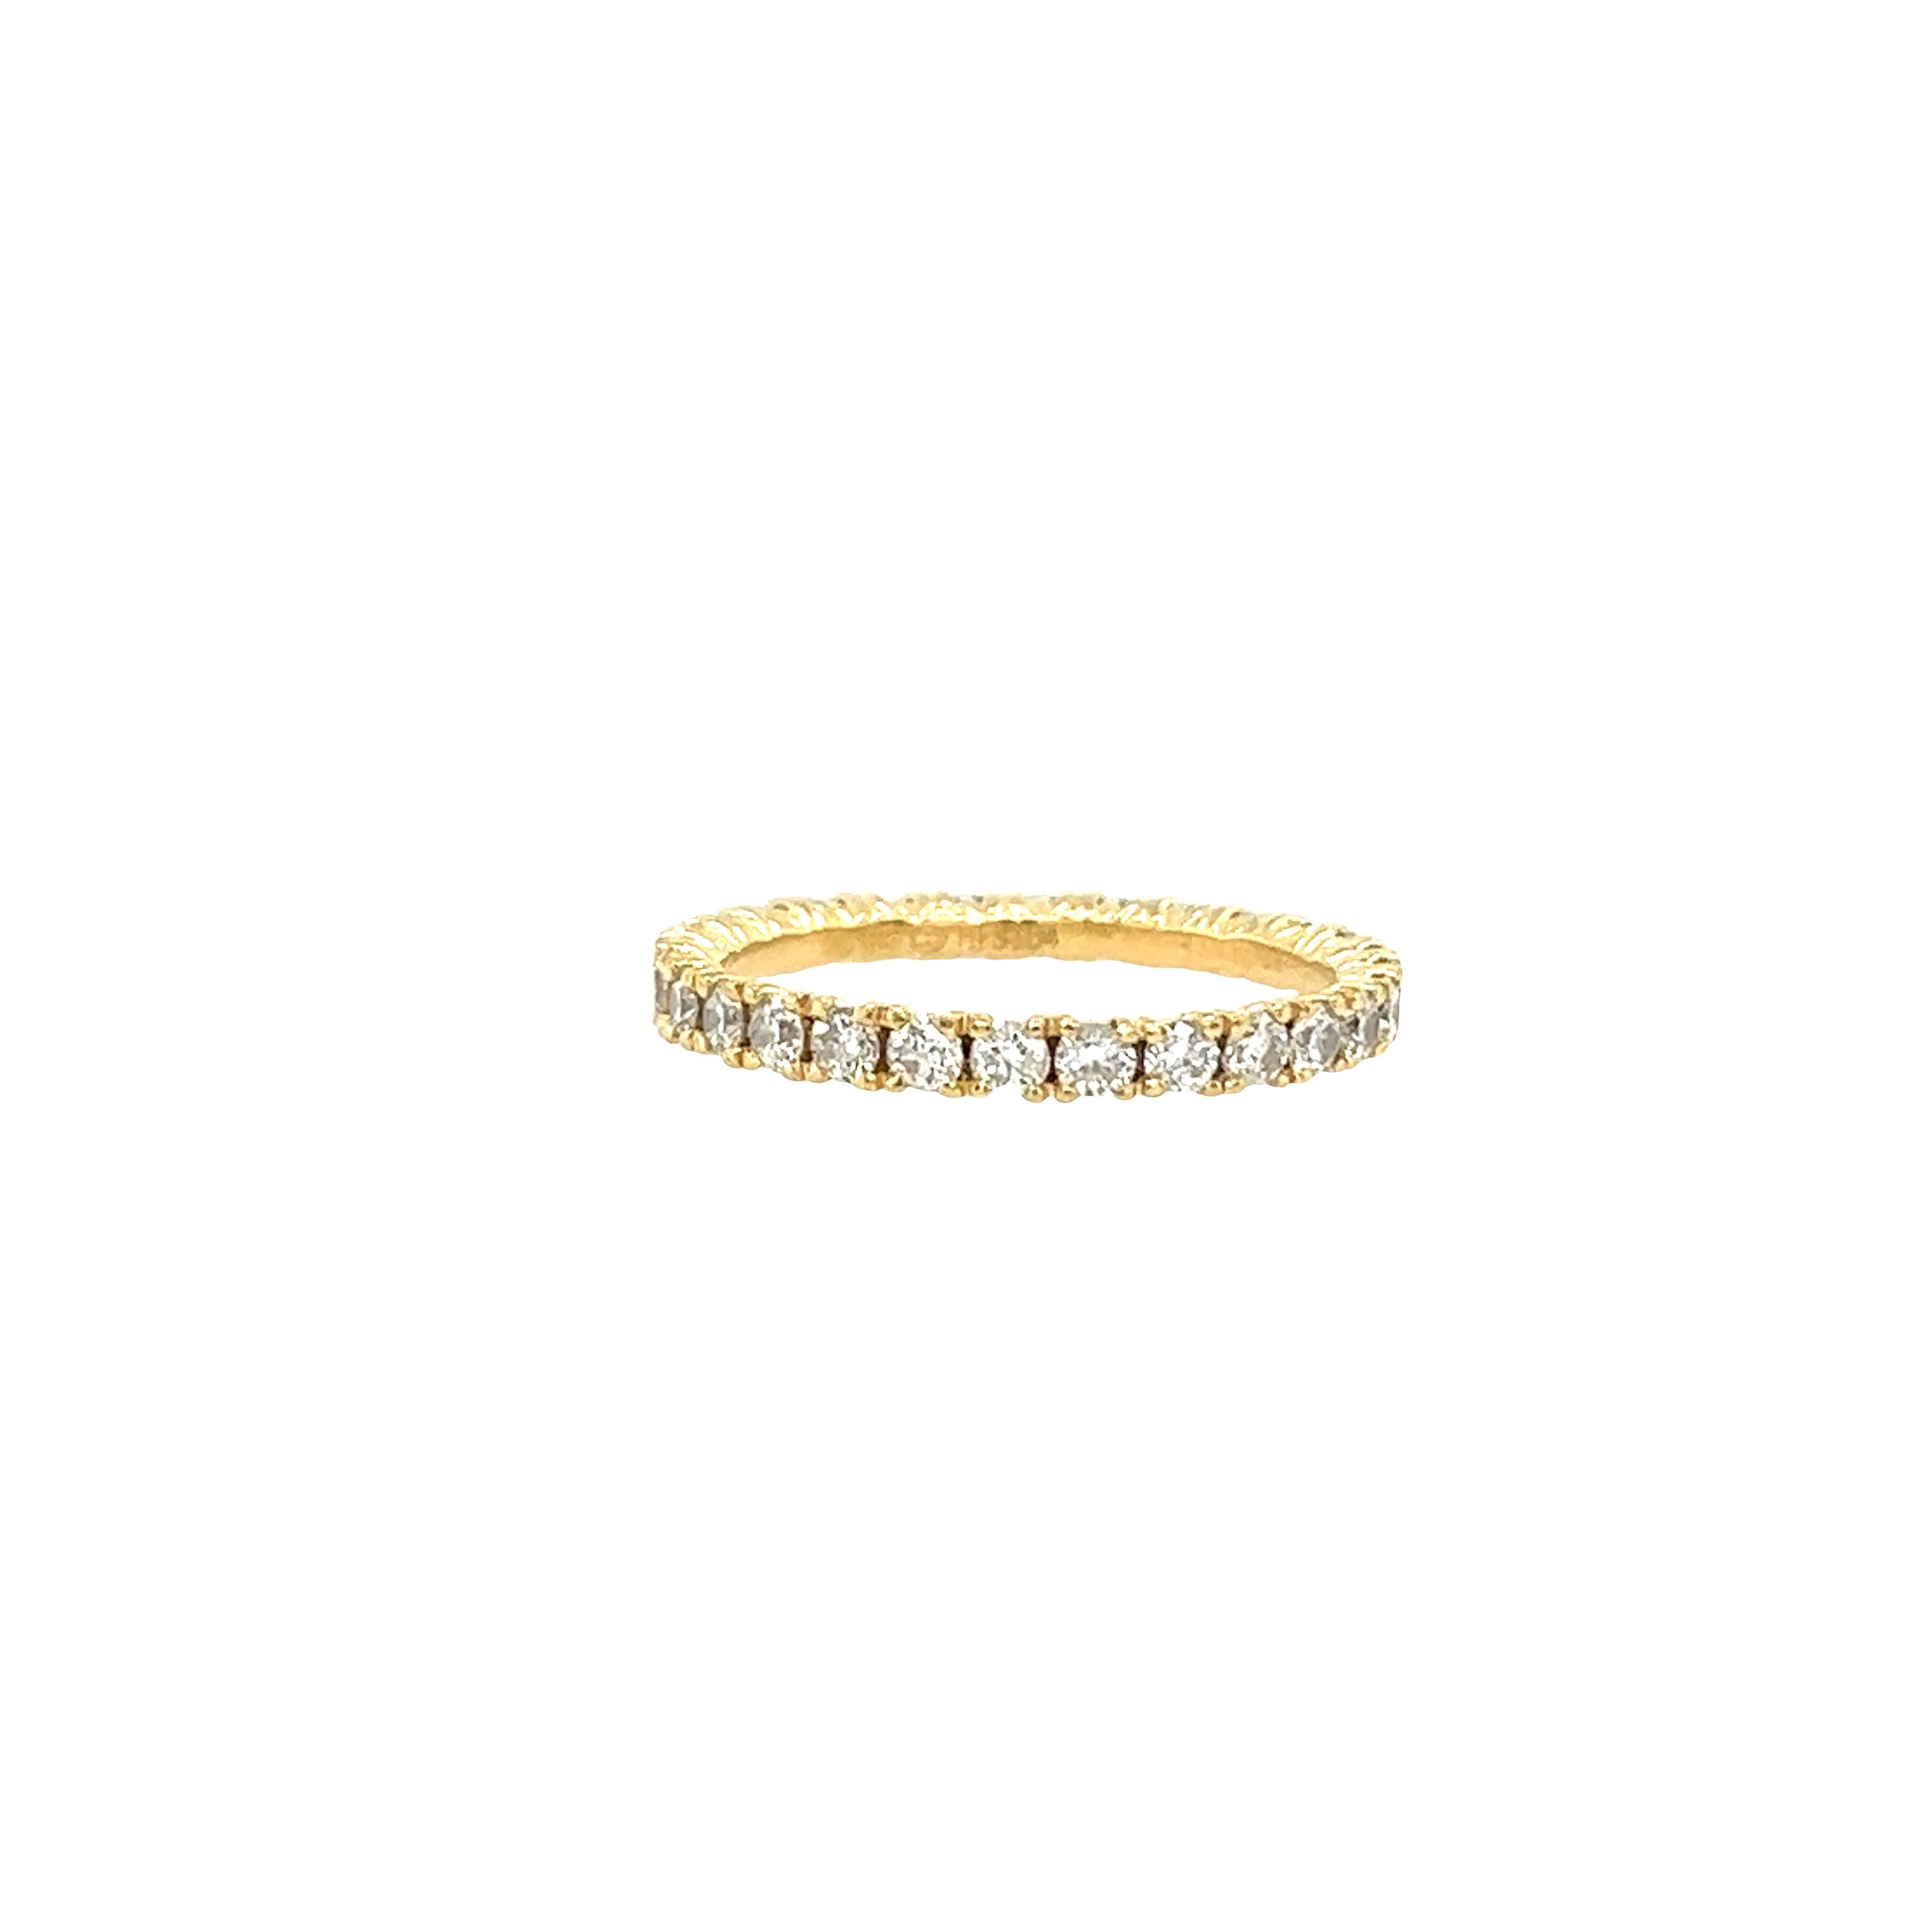 Browns 18ct Yellow Gold Diamond Full Eternity Ring Set With 1.06ct For Sale 2